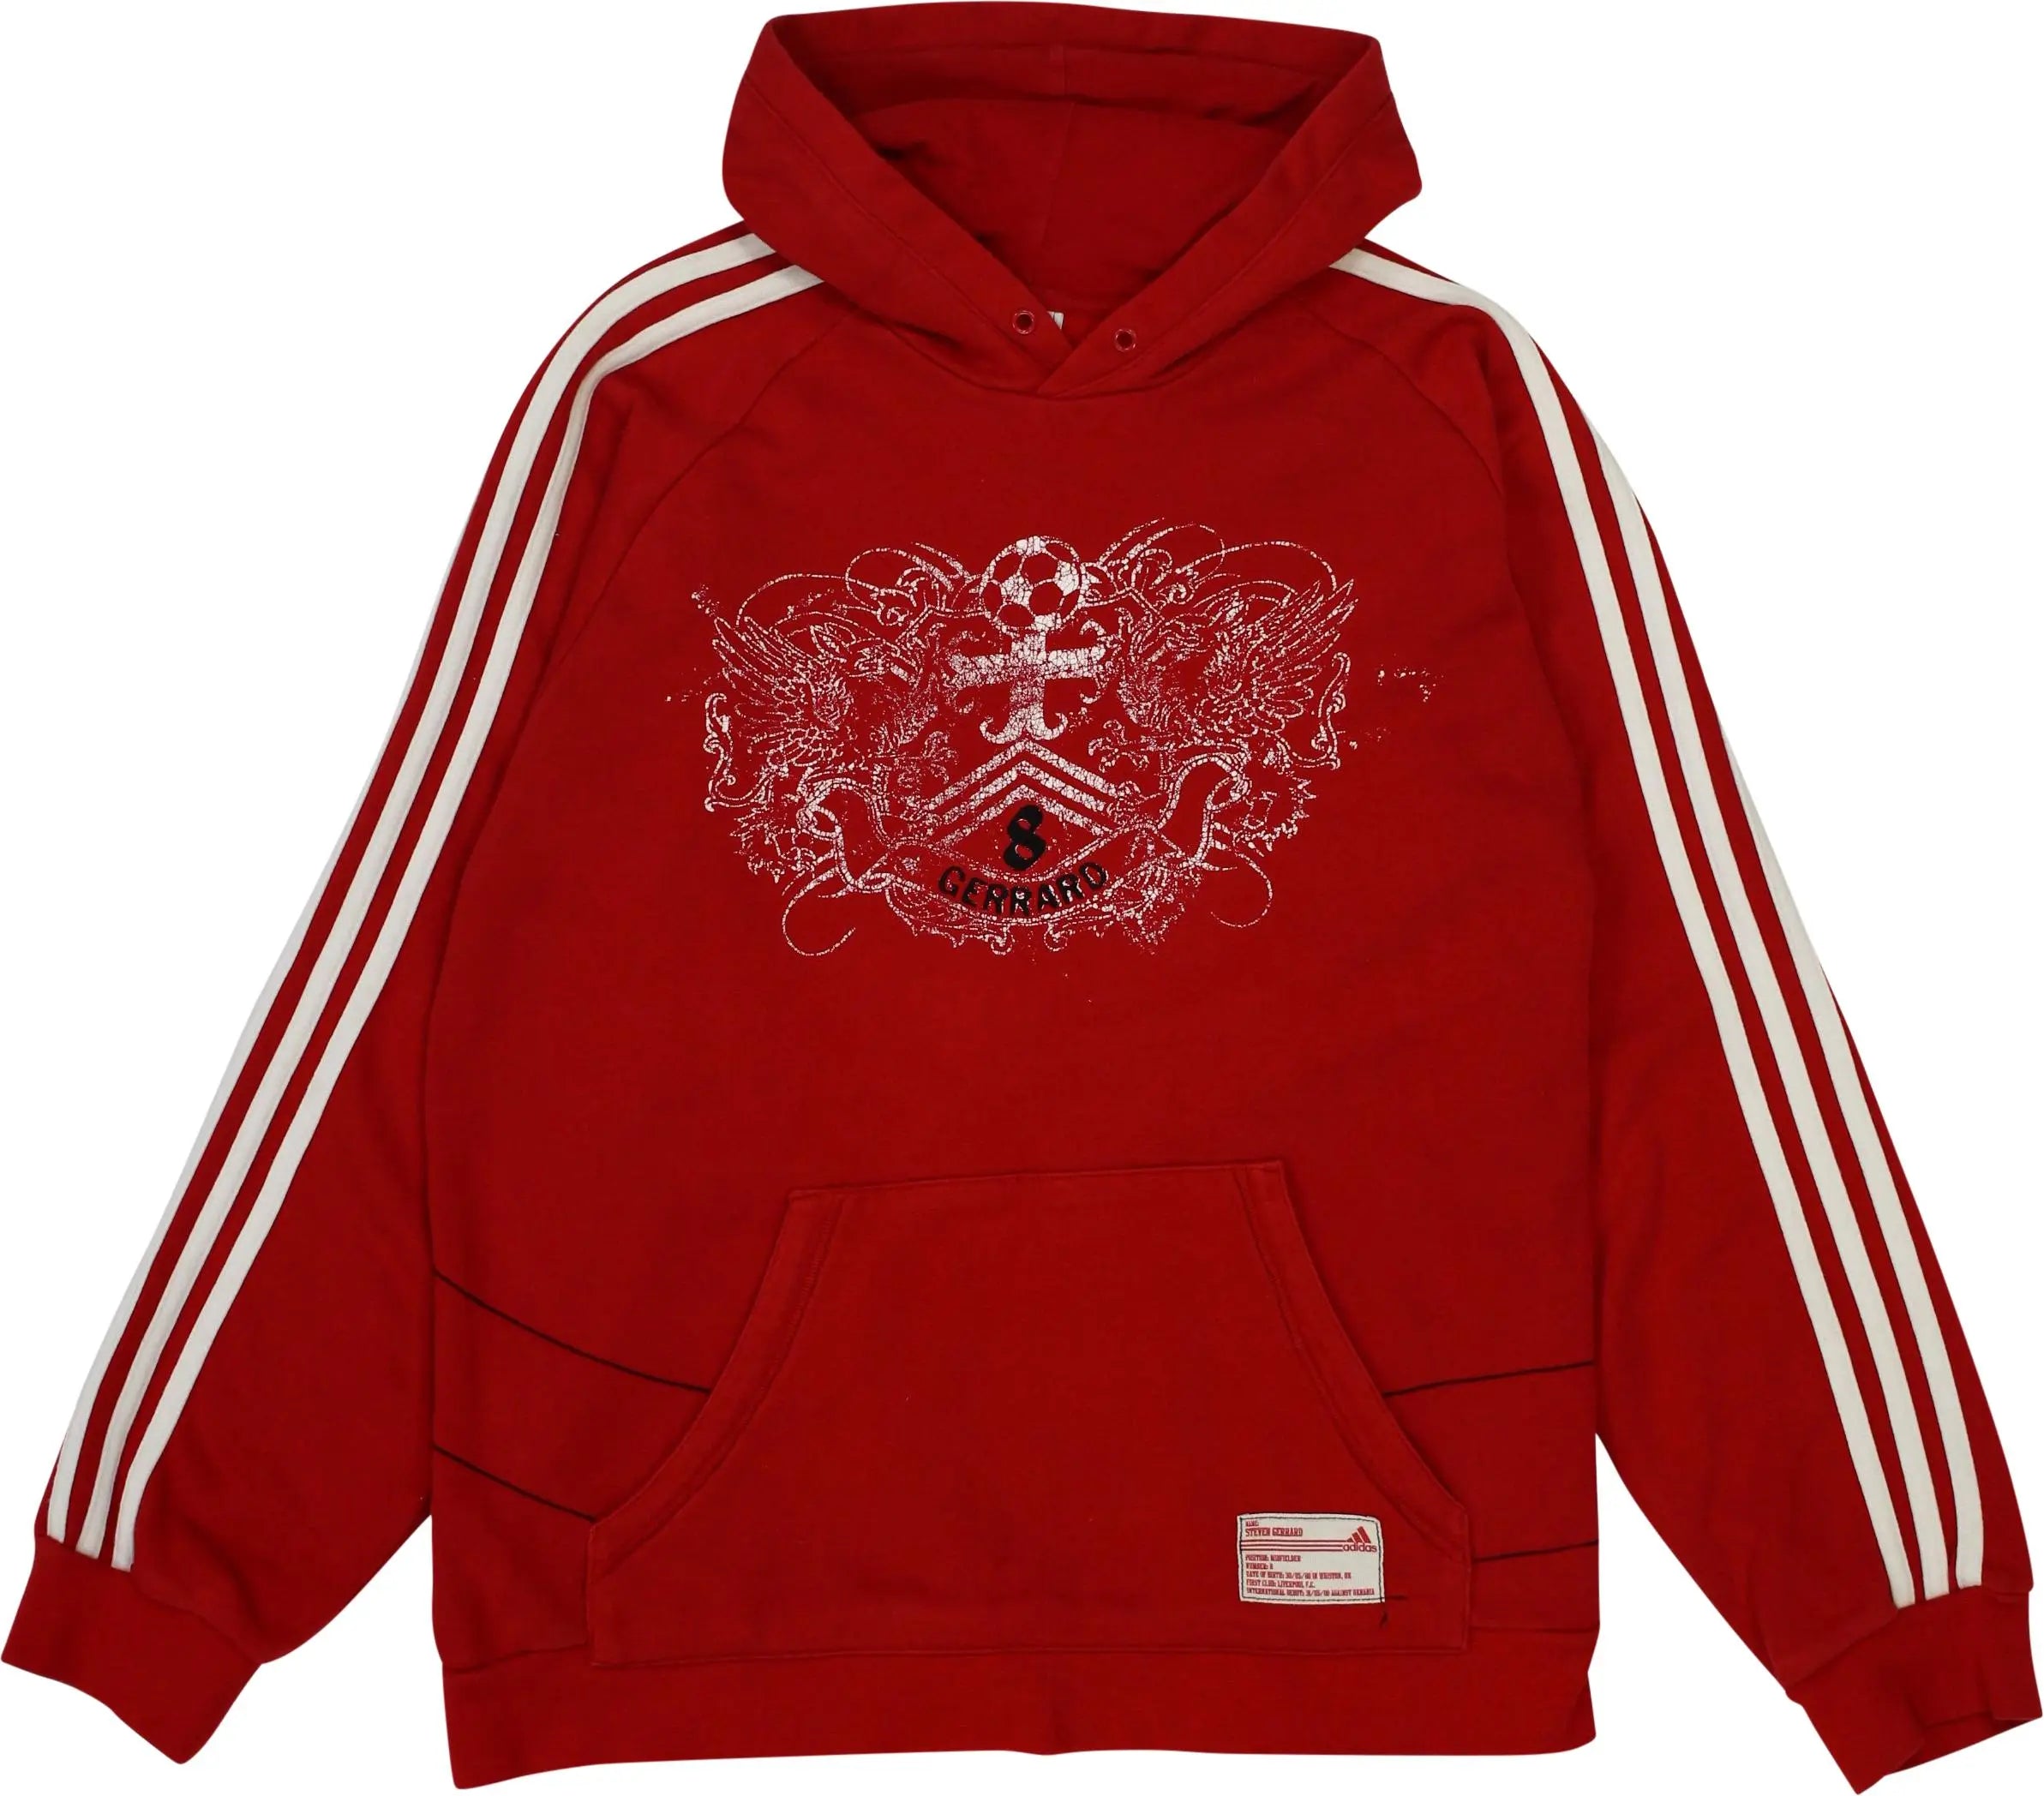 Adidas - Adidas Hoodie- ThriftTale.com - Vintage and second handclothing